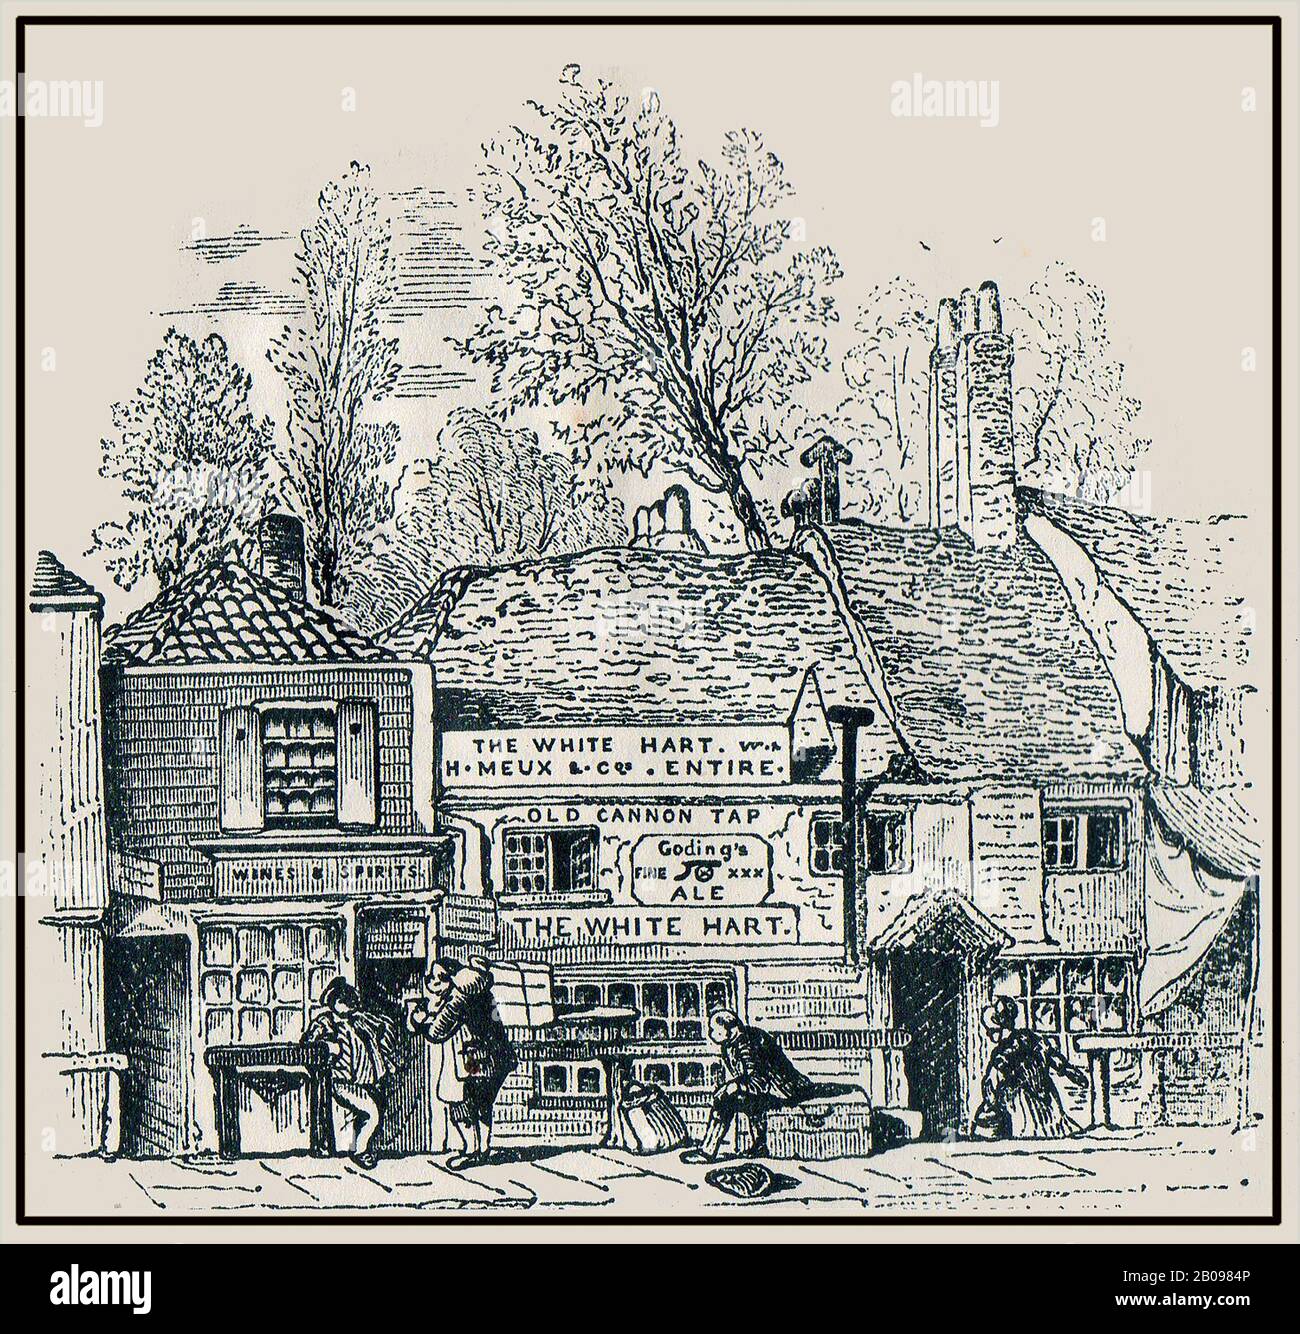 An historic engraving showing the White Hart Inn and Old Canon Tap in Knightsbridge, London, UK circa 1850. The attached wine and spirits vaults was formerly  a carpenters shop (1820) before the pub expanded, also extending into  a house to the right of the picture. The inn was a popular was a watering house for hackney carriages and was frequented by local carriers and  porters. Hart is the name for a mature stag ( It was the personal badge of King Richard II). Knightsbridge, formerly a small hamlet is now  a high class  residential and retail part of the city. Stock Photo